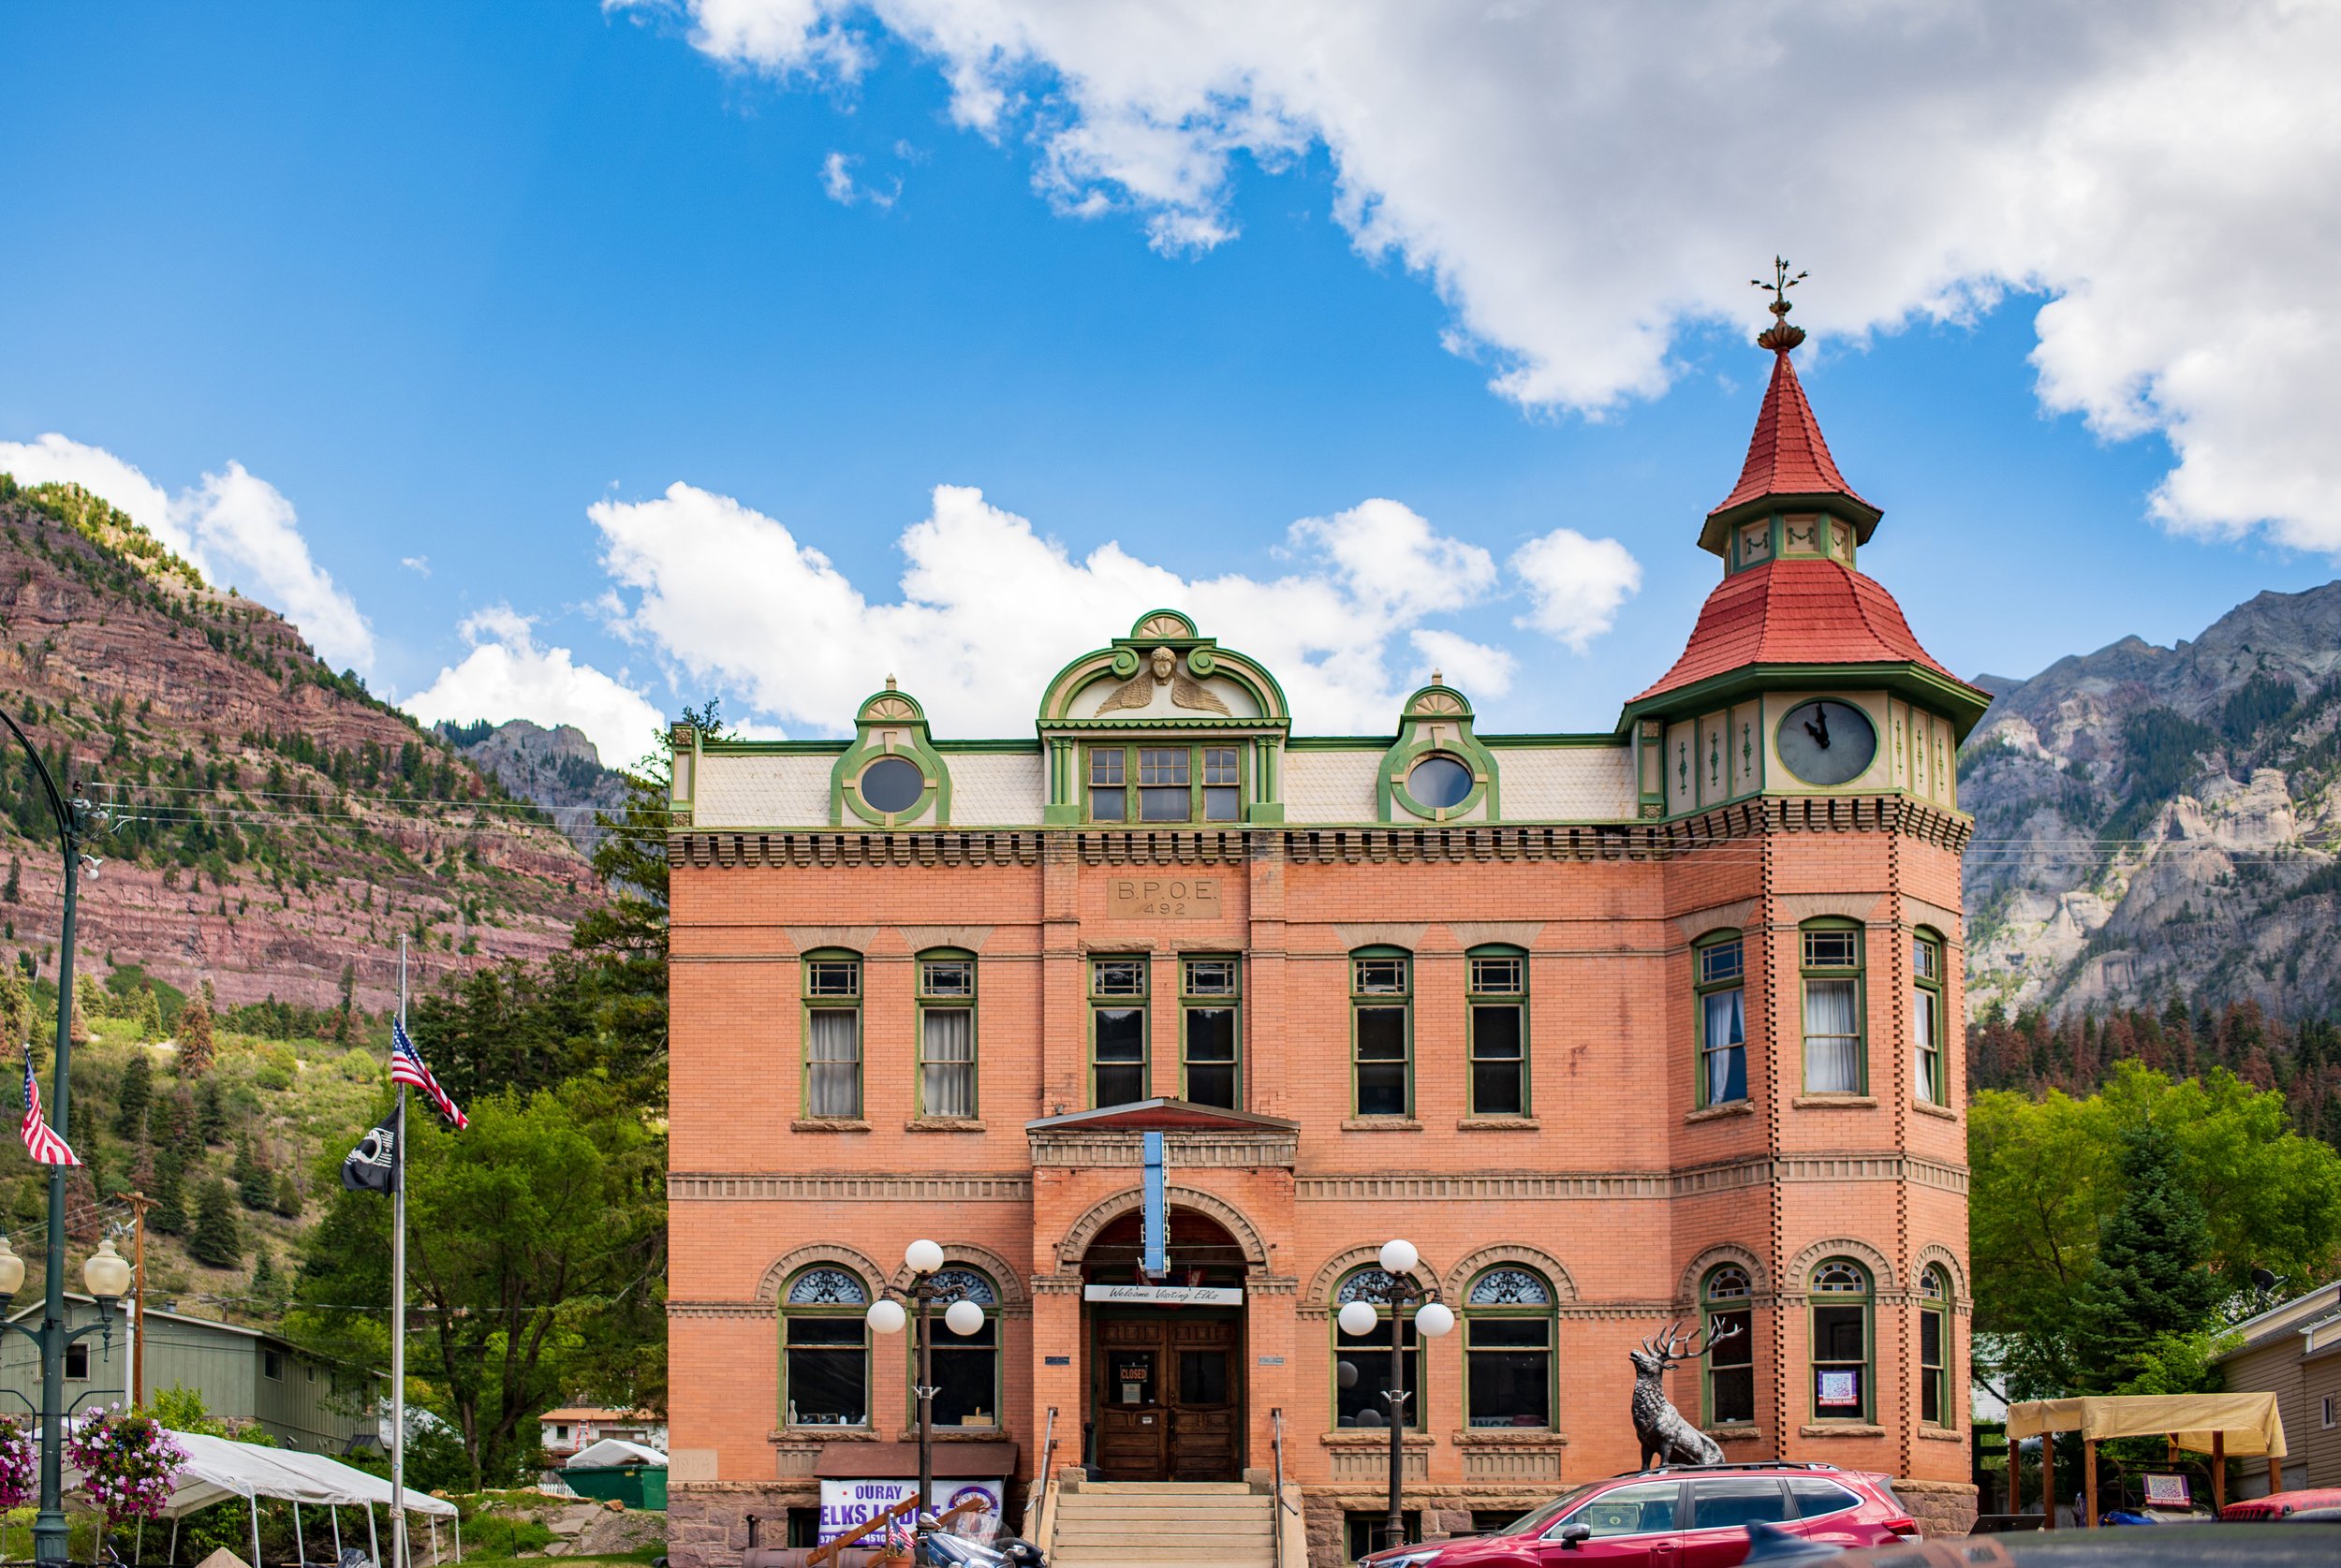 The Ouray Elks Lodge